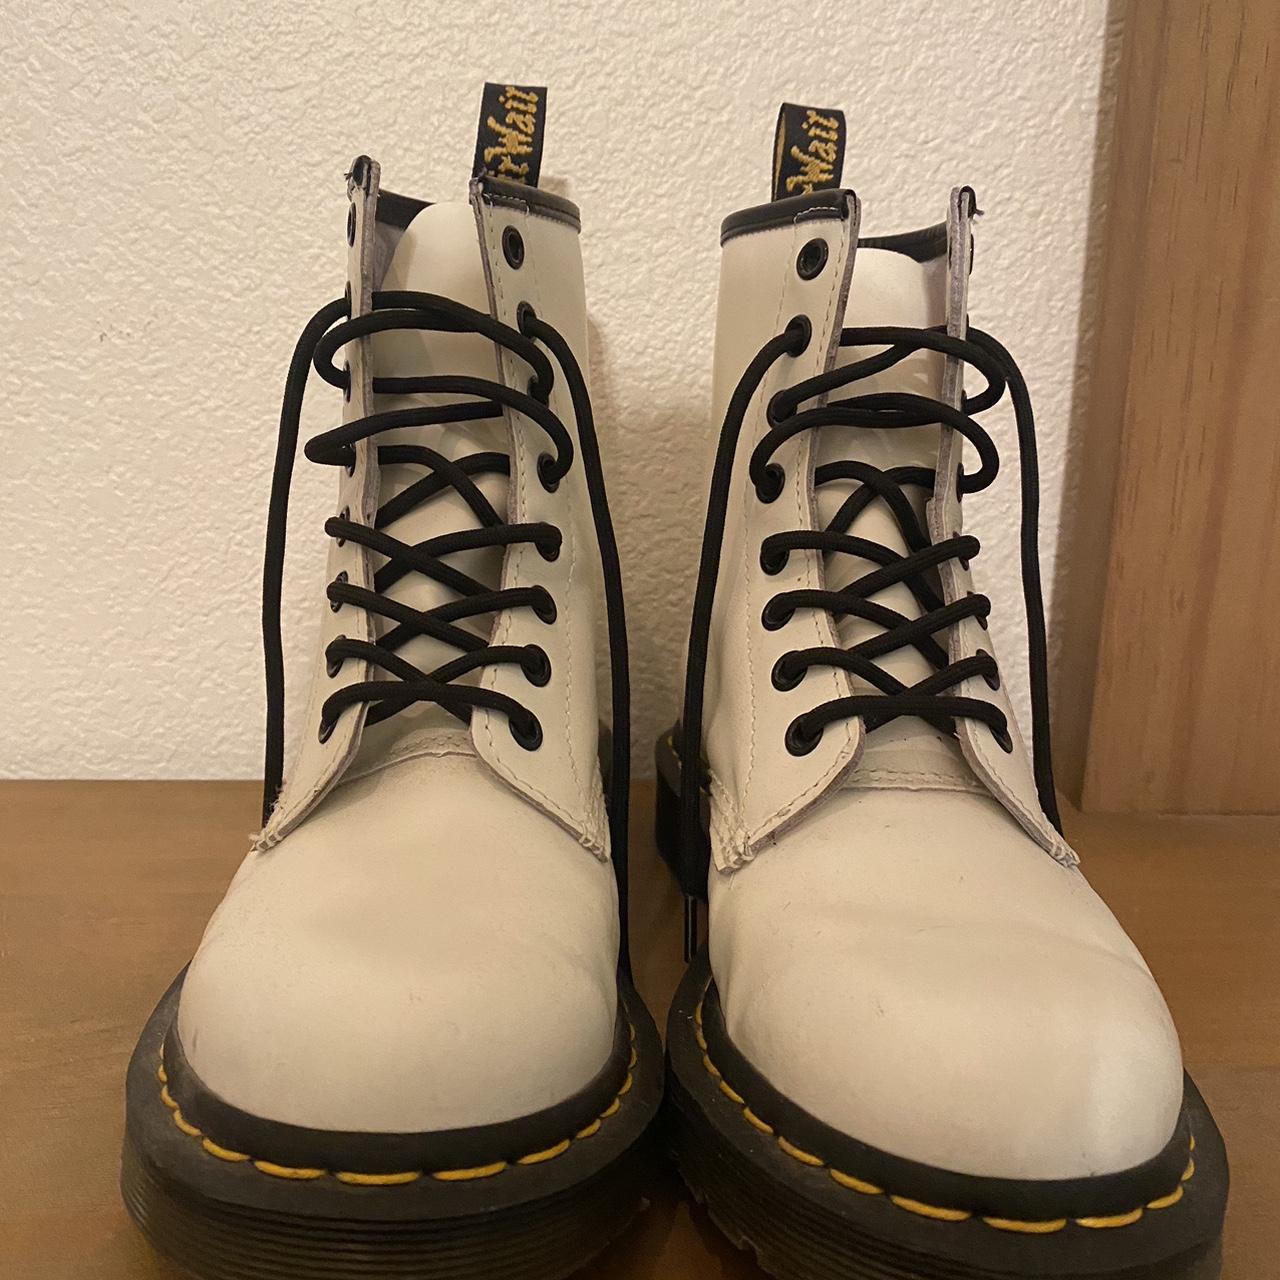 Dr. Martens Women's White and Yellow Boots (2)